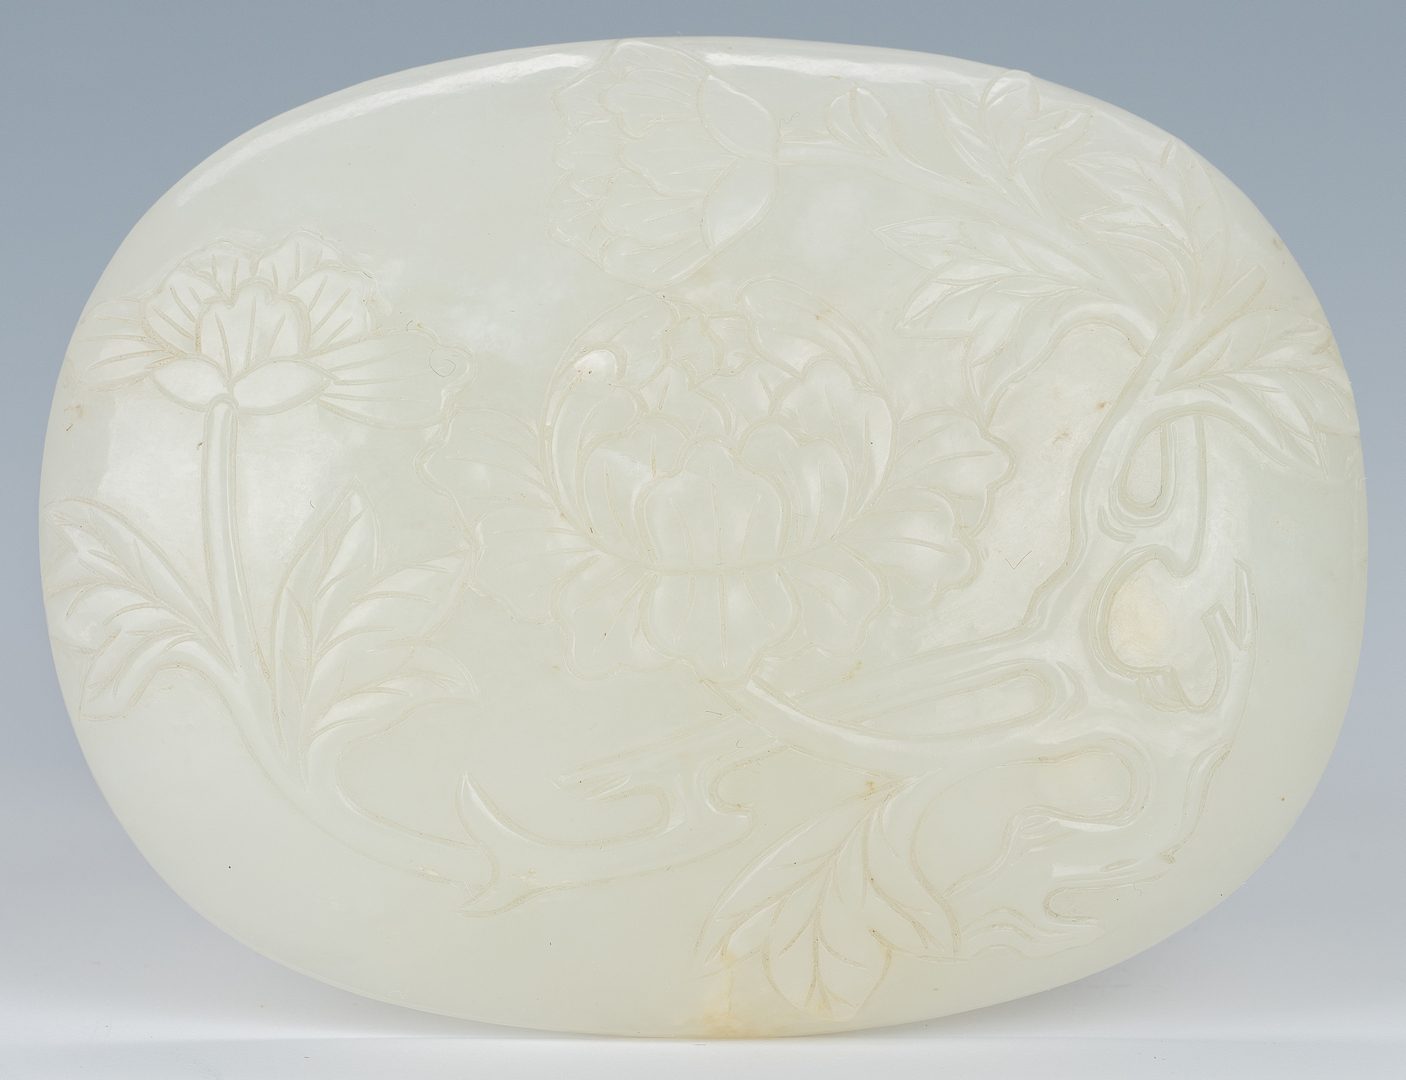 Lot 2: Carved Oval Chinese White Jade Buckle